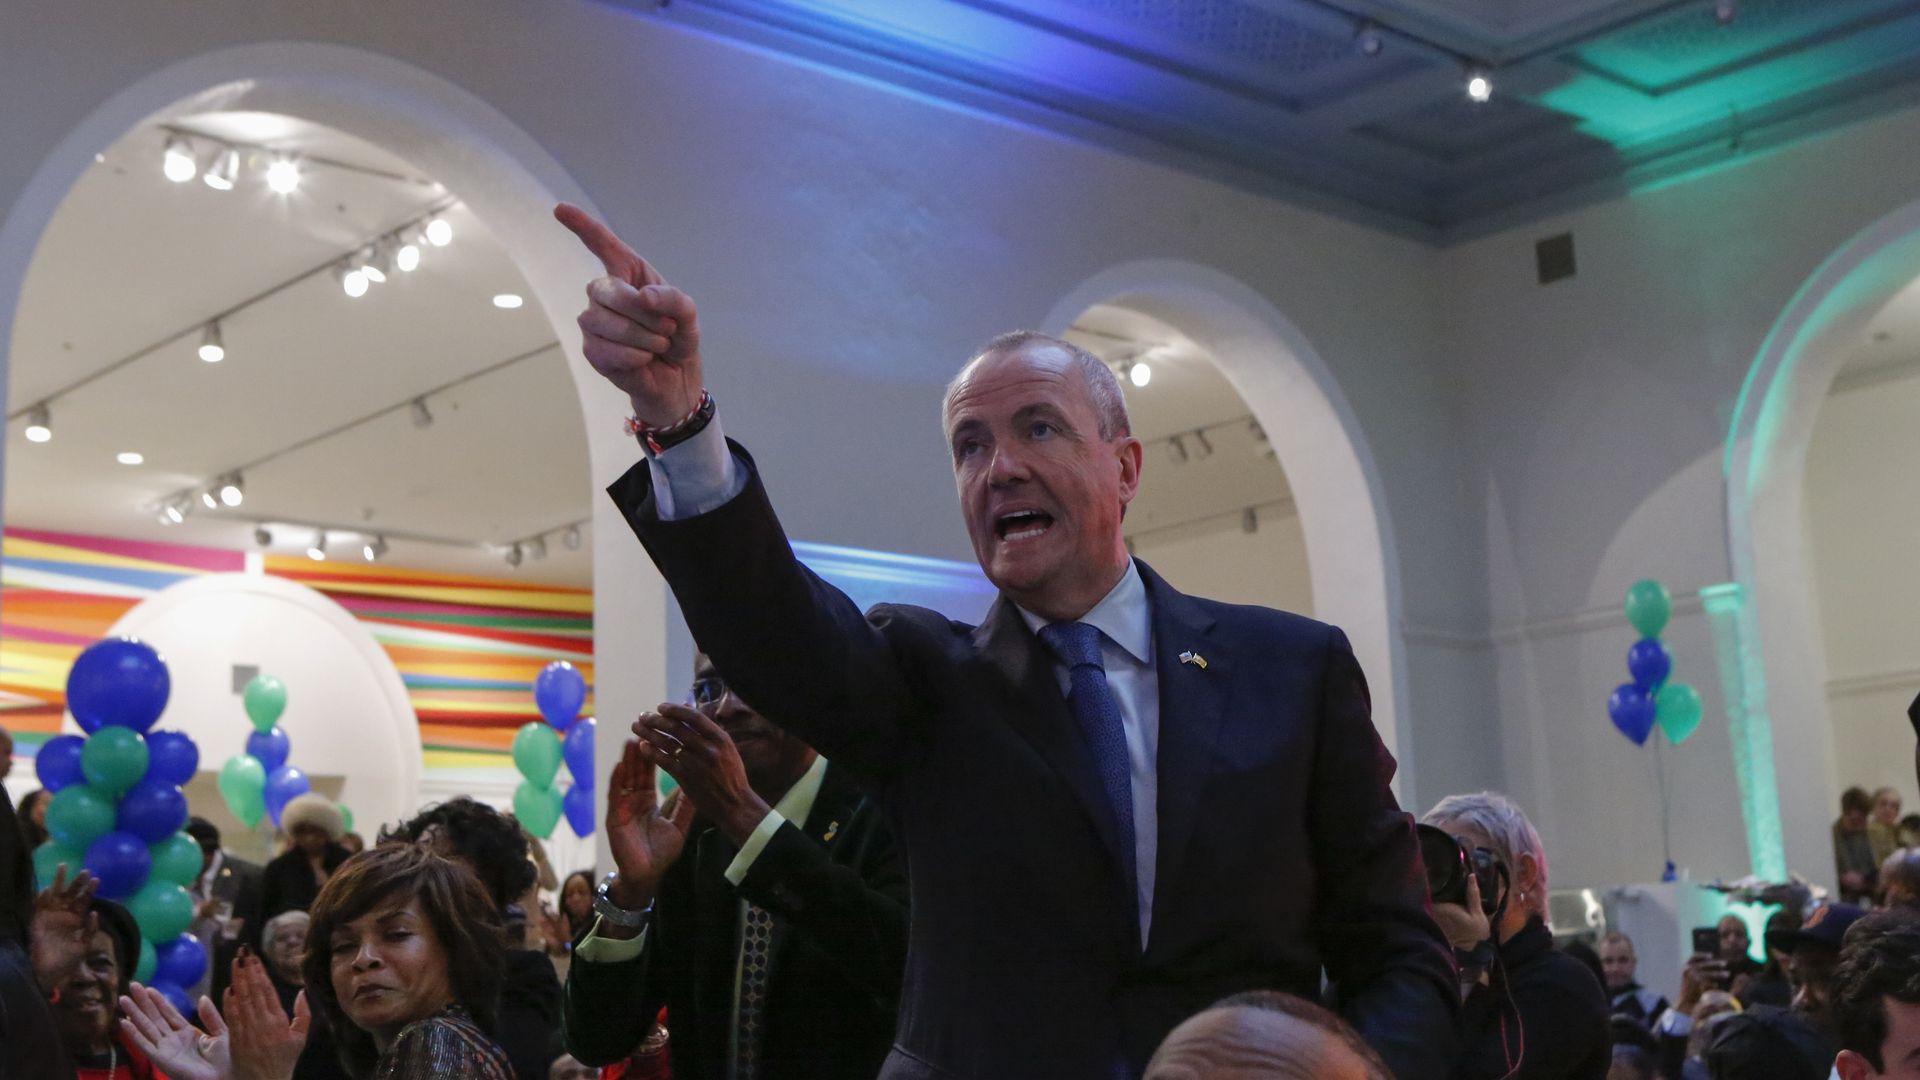  New Jersey Governor elect Phil Murphy attends The Inaugural Kickoff at the Newark Museum on January 12, 2018 in Newark, New Jersey. (Photo by Kena Betancur/VIEWpress/Corbis via Getty Images)